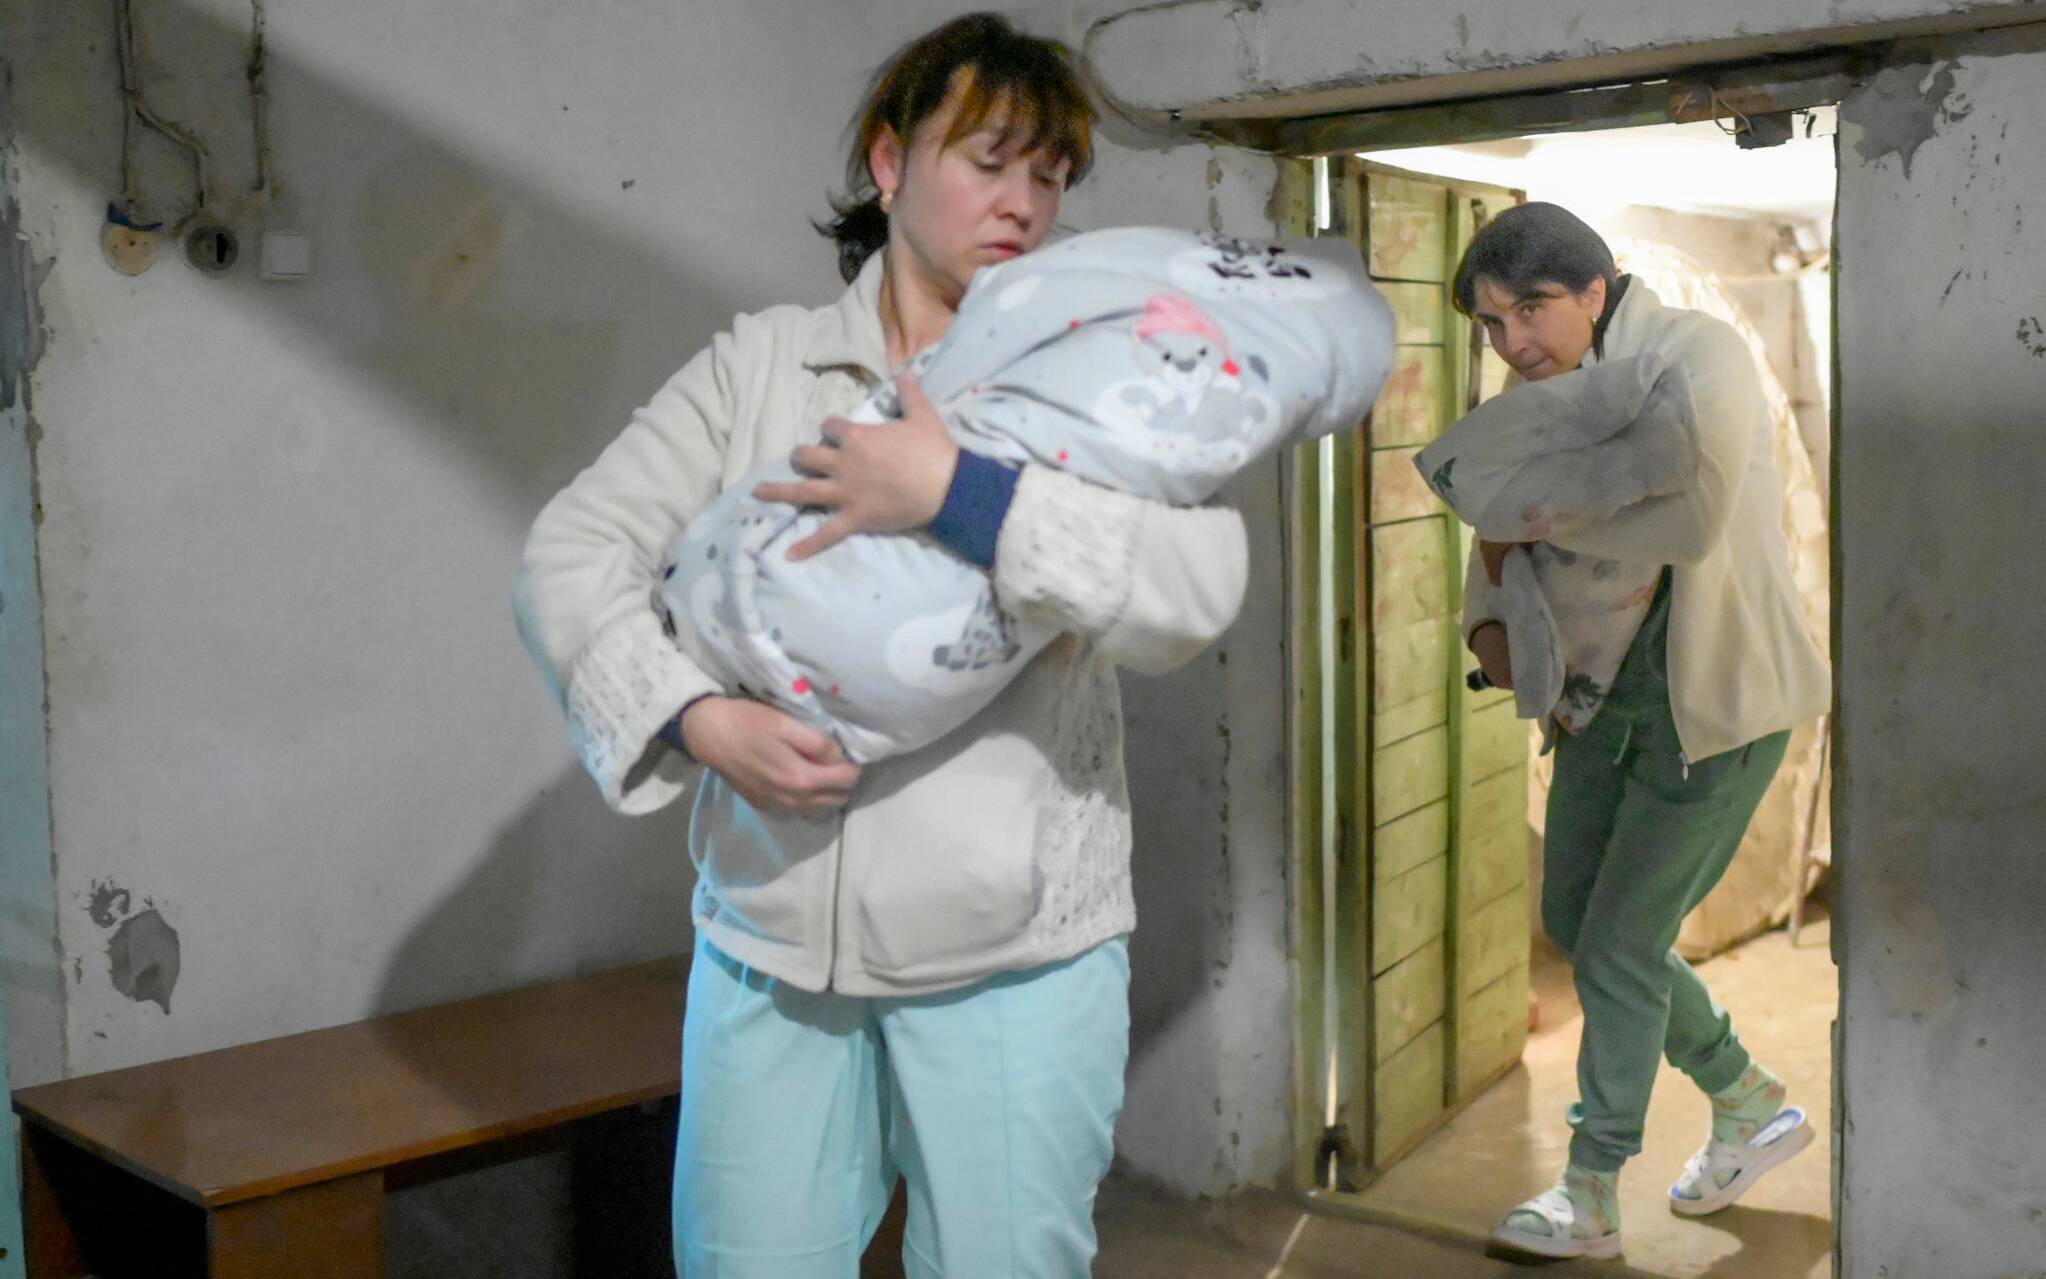 Nurses carry babies to the basement of maternity hospital as sirens warning for air raids in Mykolaiv, on March 14, 2022. - Almost half of the 49 women have had to give birth in the basement since 24 February. Mykolaïv is the scene of violent clashes, as Russian troops want to break down this last lock before the large port of Odessa, 130 km further west on the Black Sea. (Photo by BULENT KILIC / AFP)